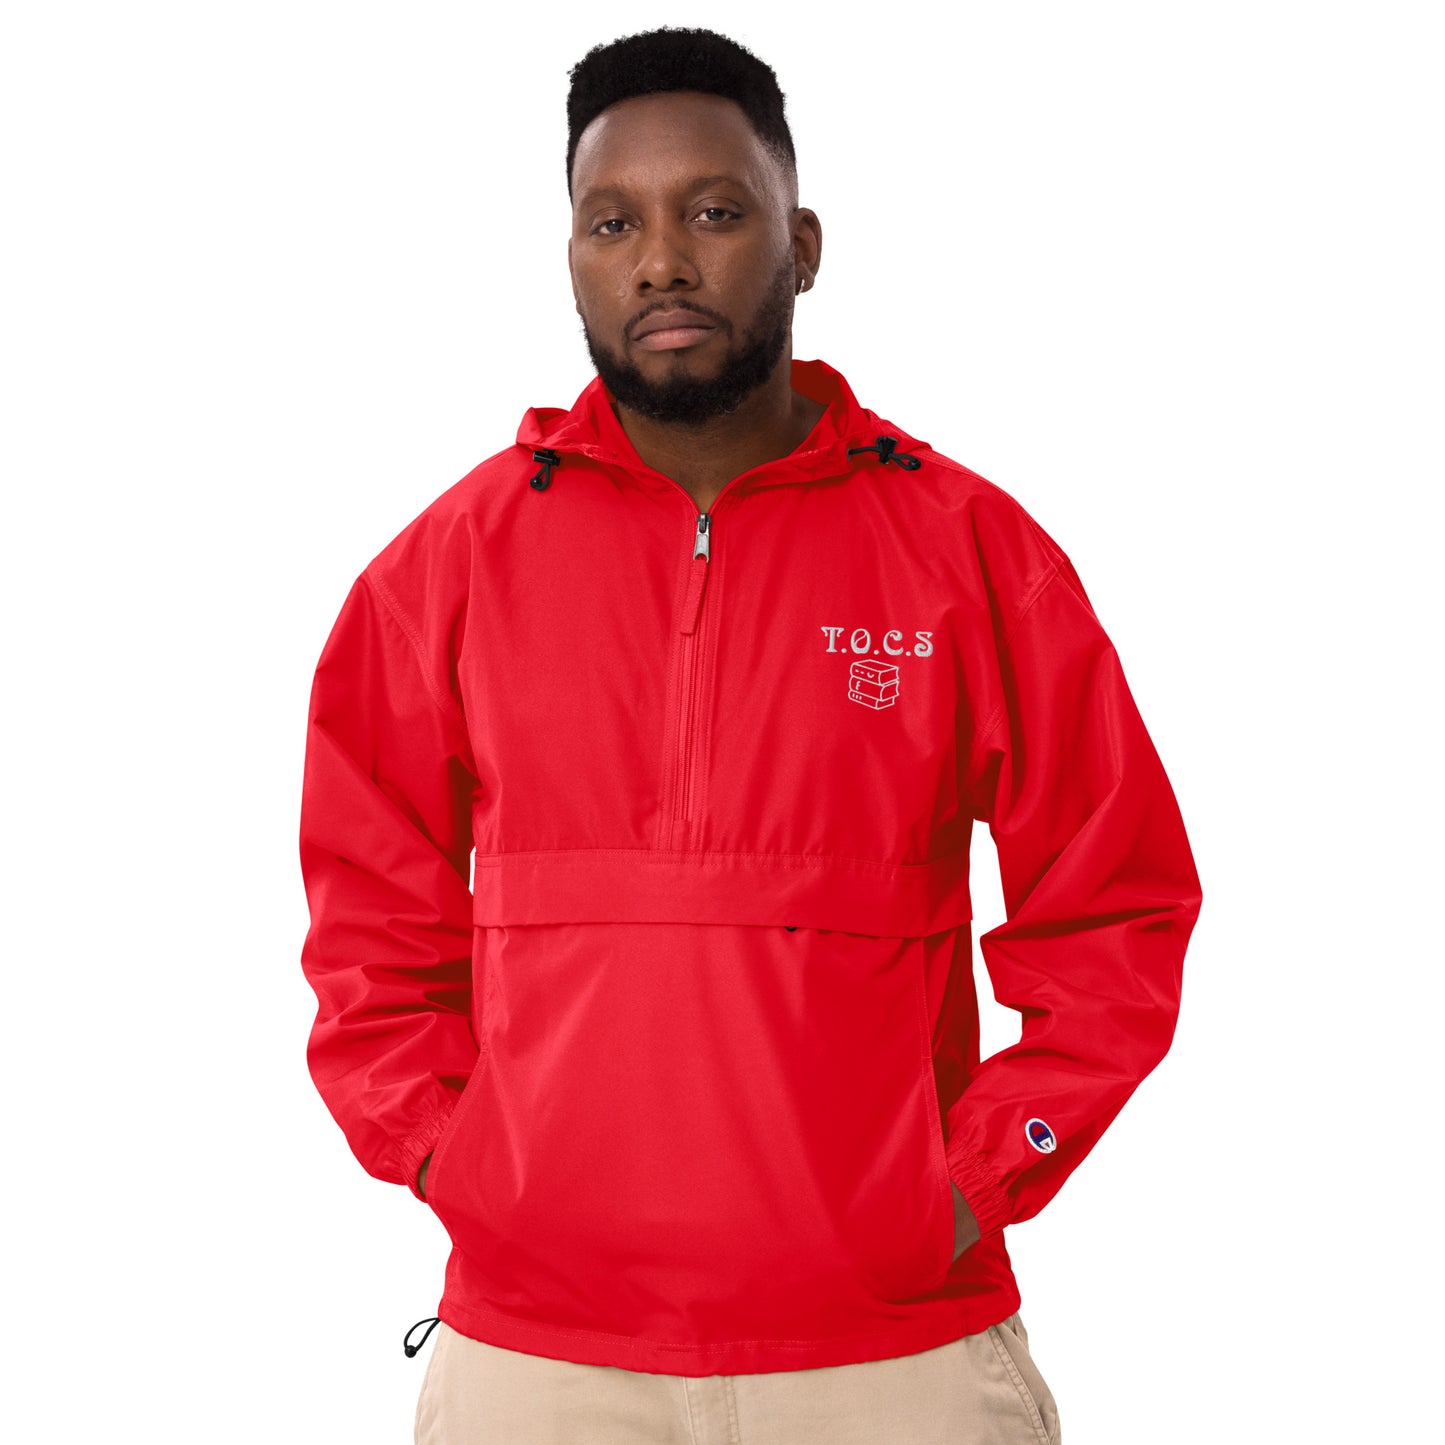 T.O.C.S. Embroidered Champion Packable Jacket